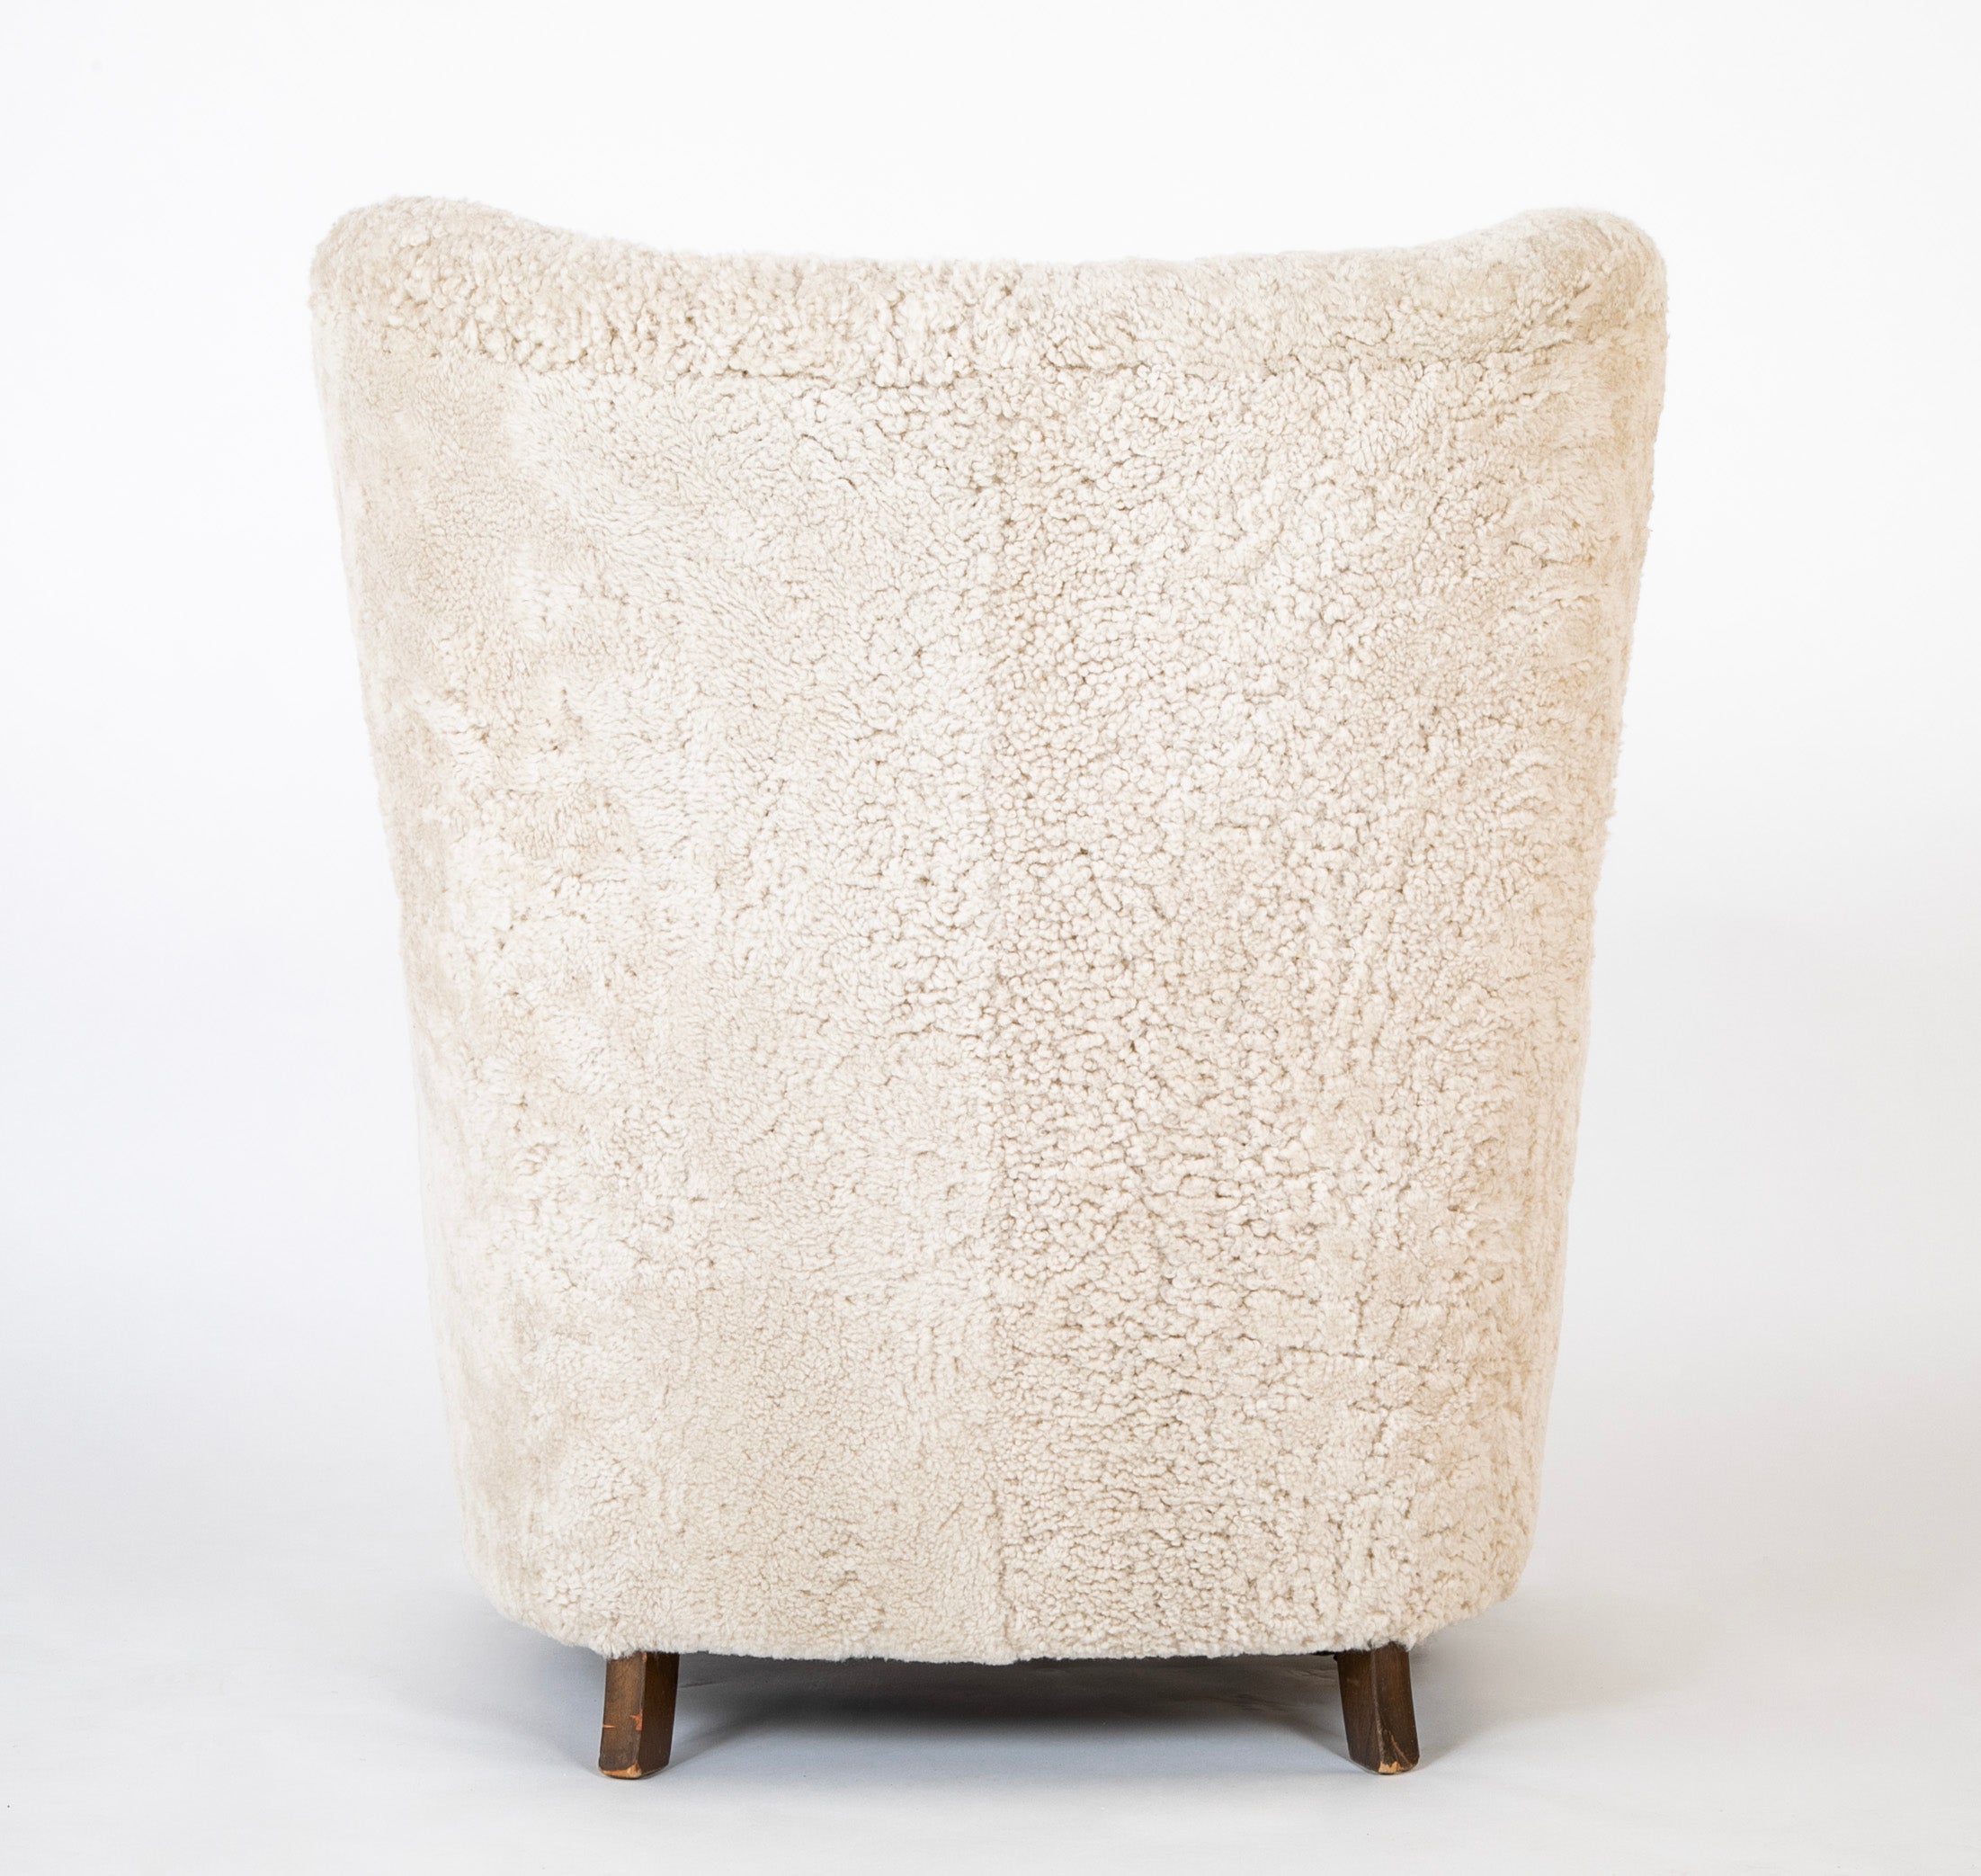 Pair of Armchairs in White Sheepskin Upholstery in the Style of Mogens Lassen